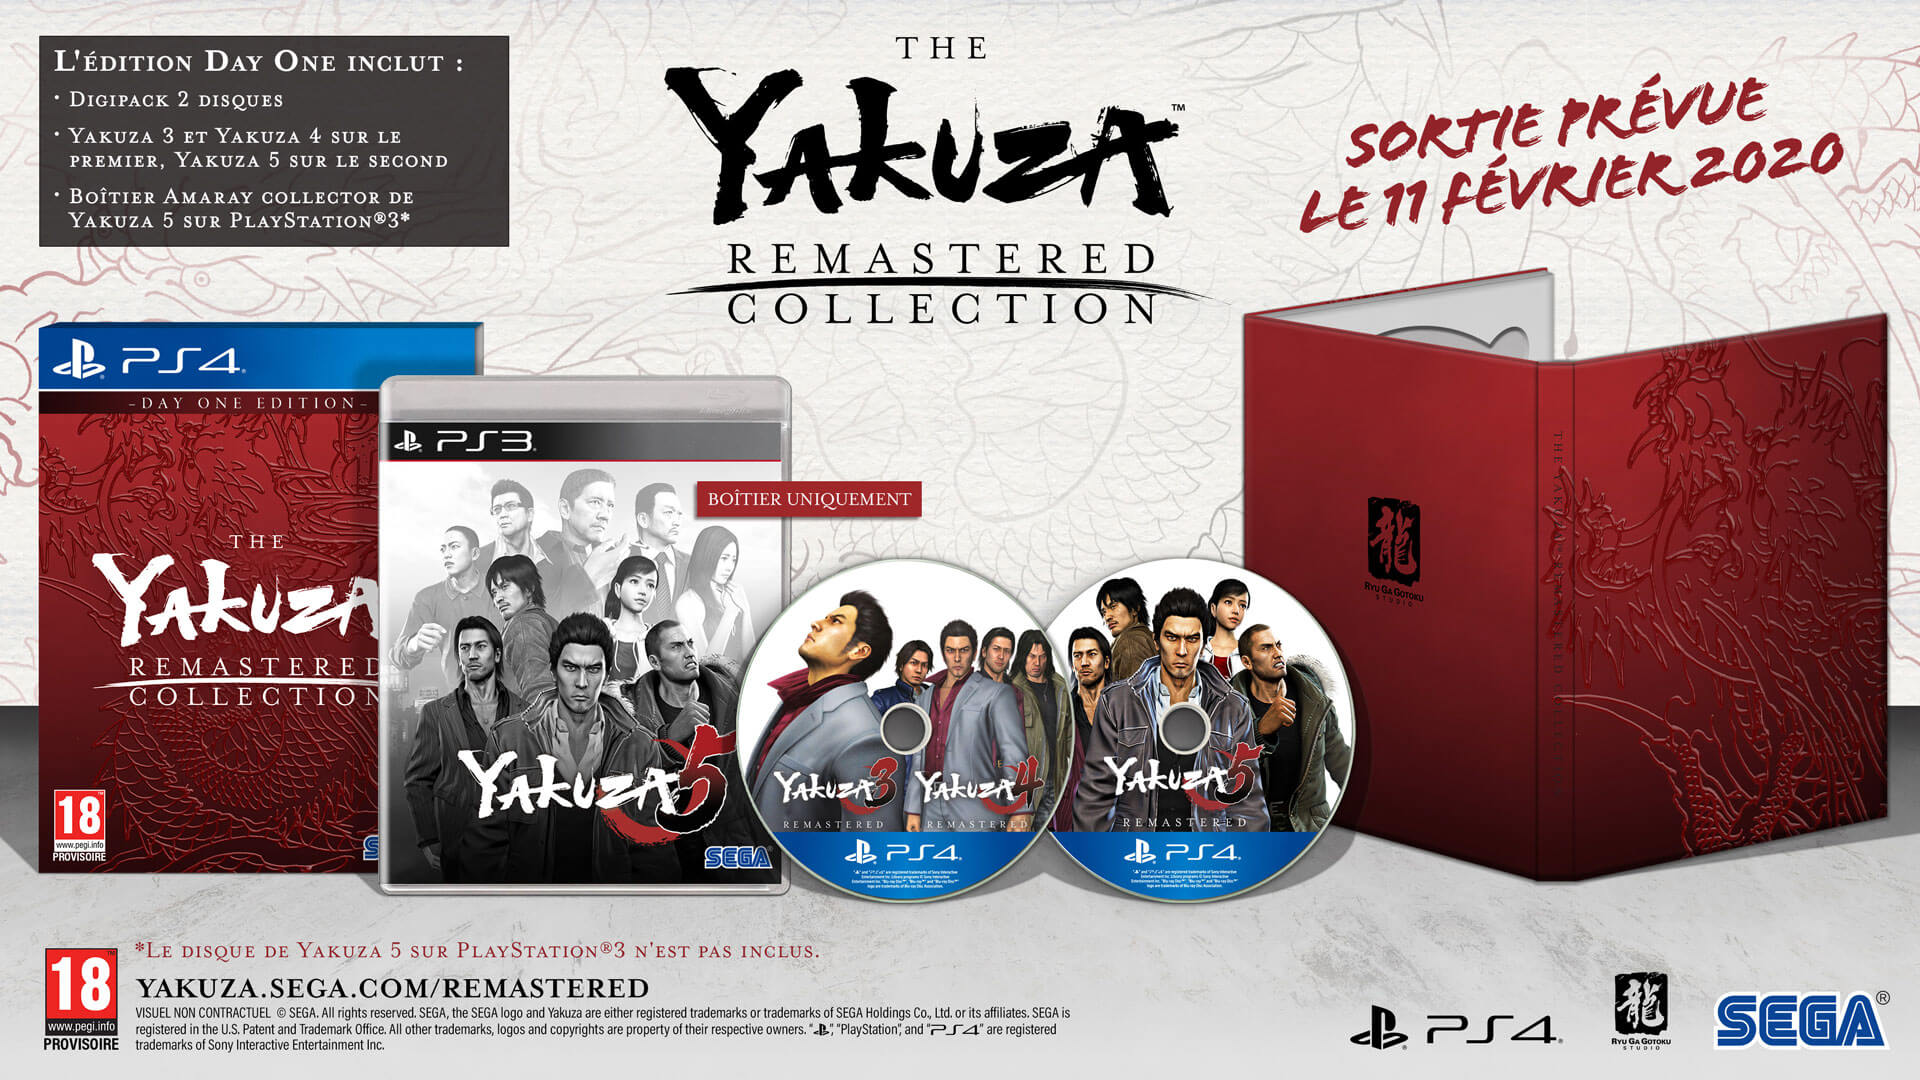 Yakuza collection remastered edition day one 1